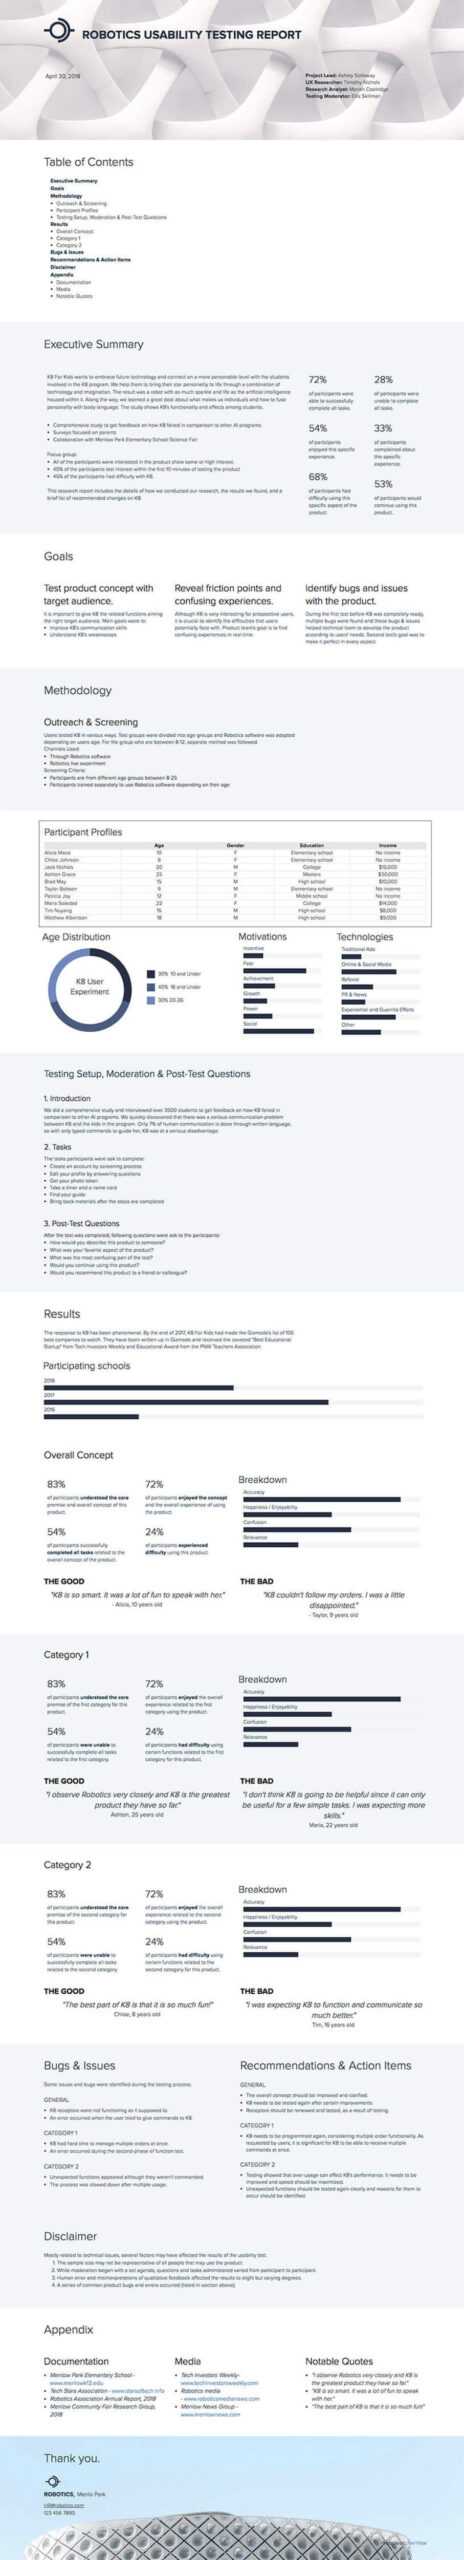 How To Write A Usability Testing Report (With Samples) | Xtensio For Usability Test Report Template